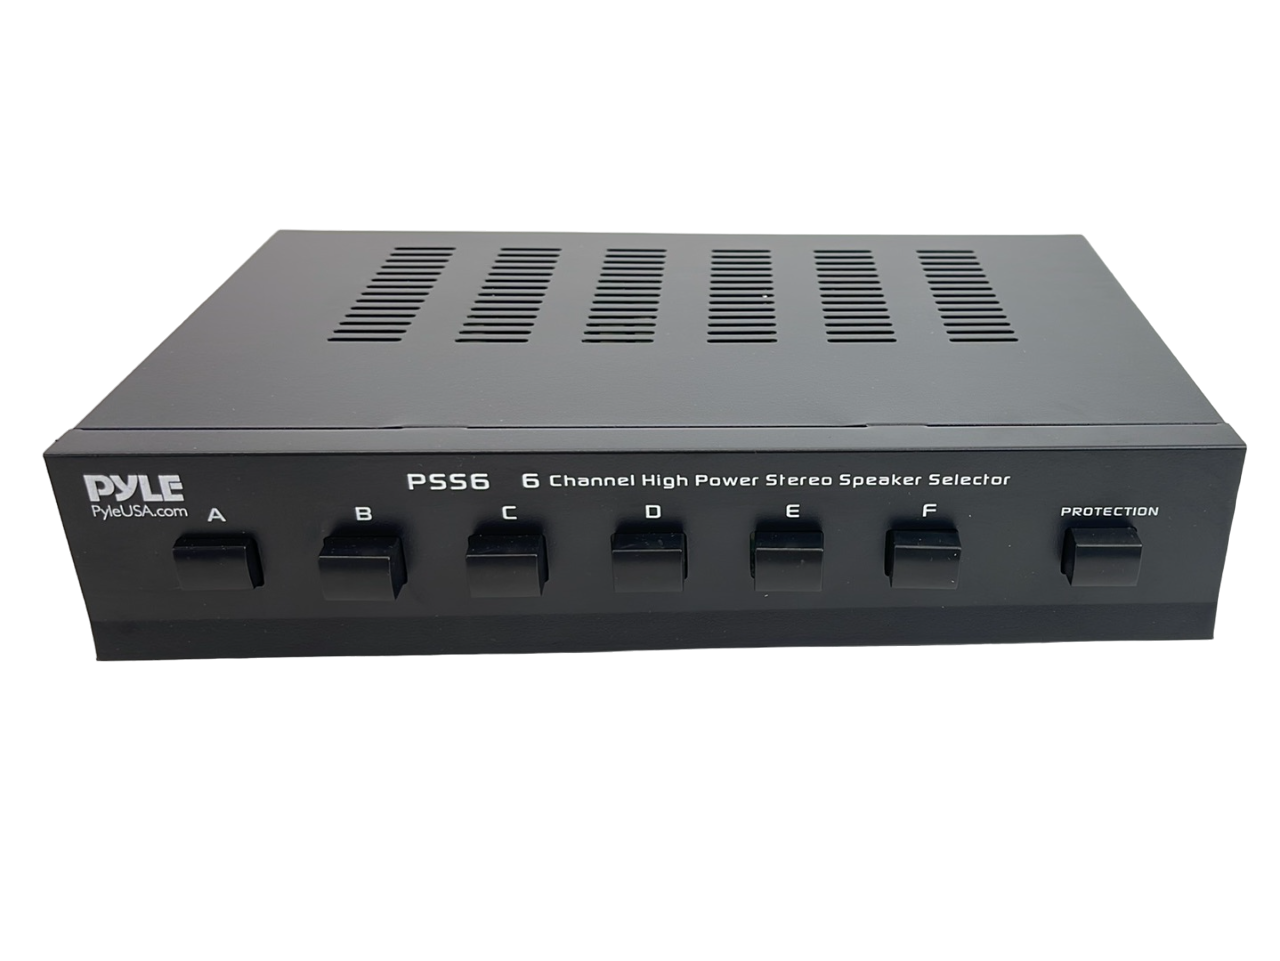 Pyle PSS6 Six-Channel High Power Stereo Speaker Selector